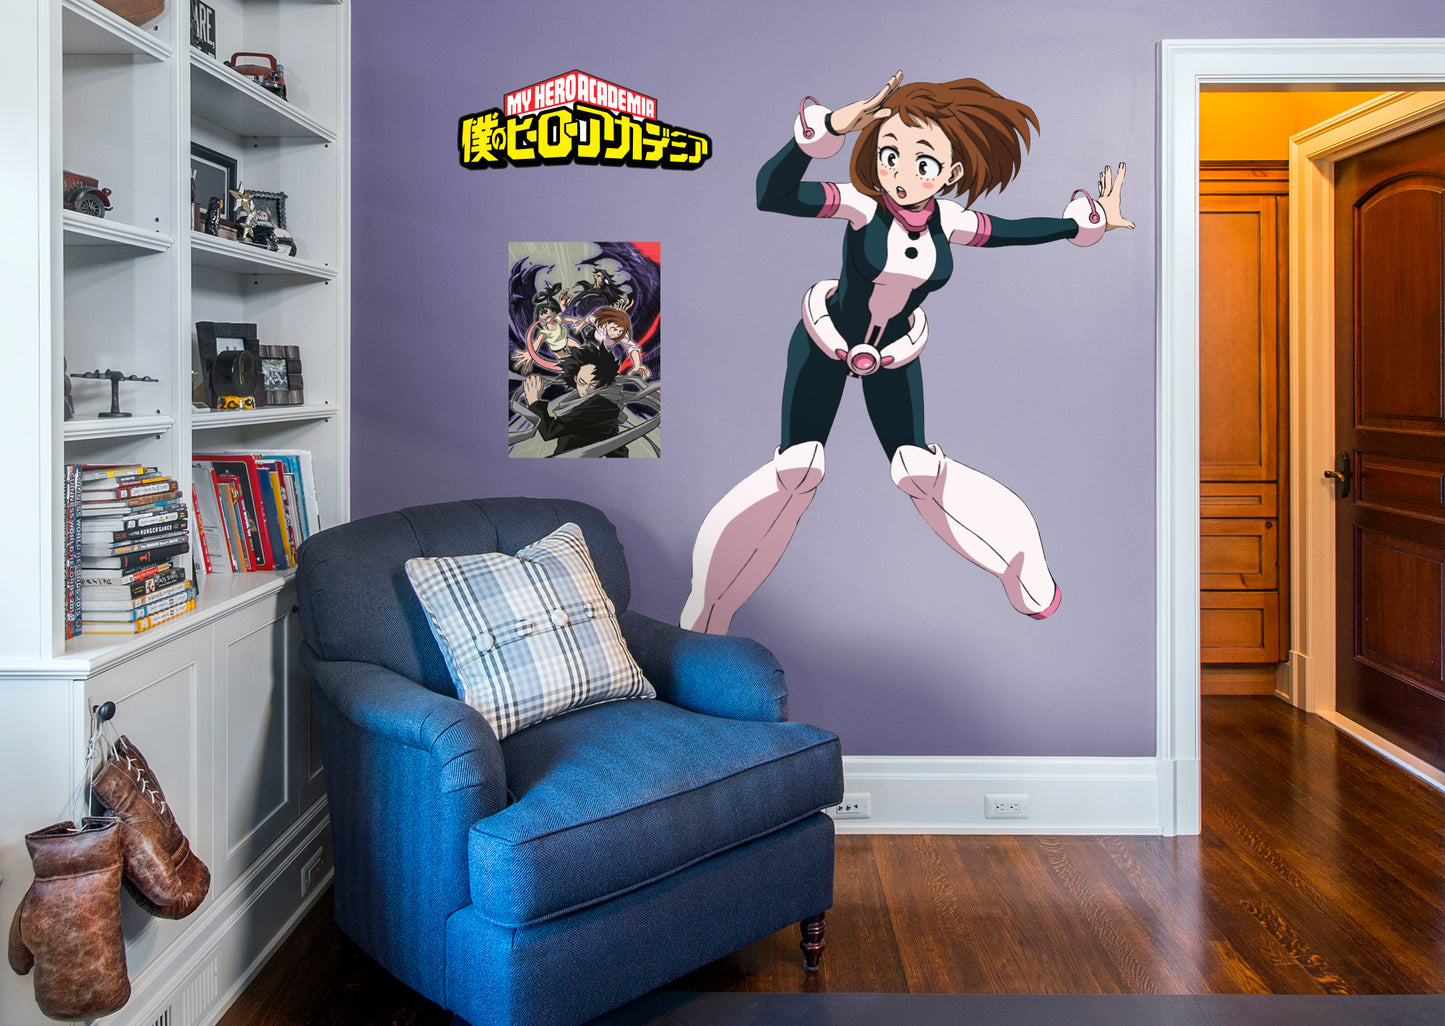 My Hero Academia: OCHACO RealBig - Officially Licensed Funimation Removable Adhesive Decal